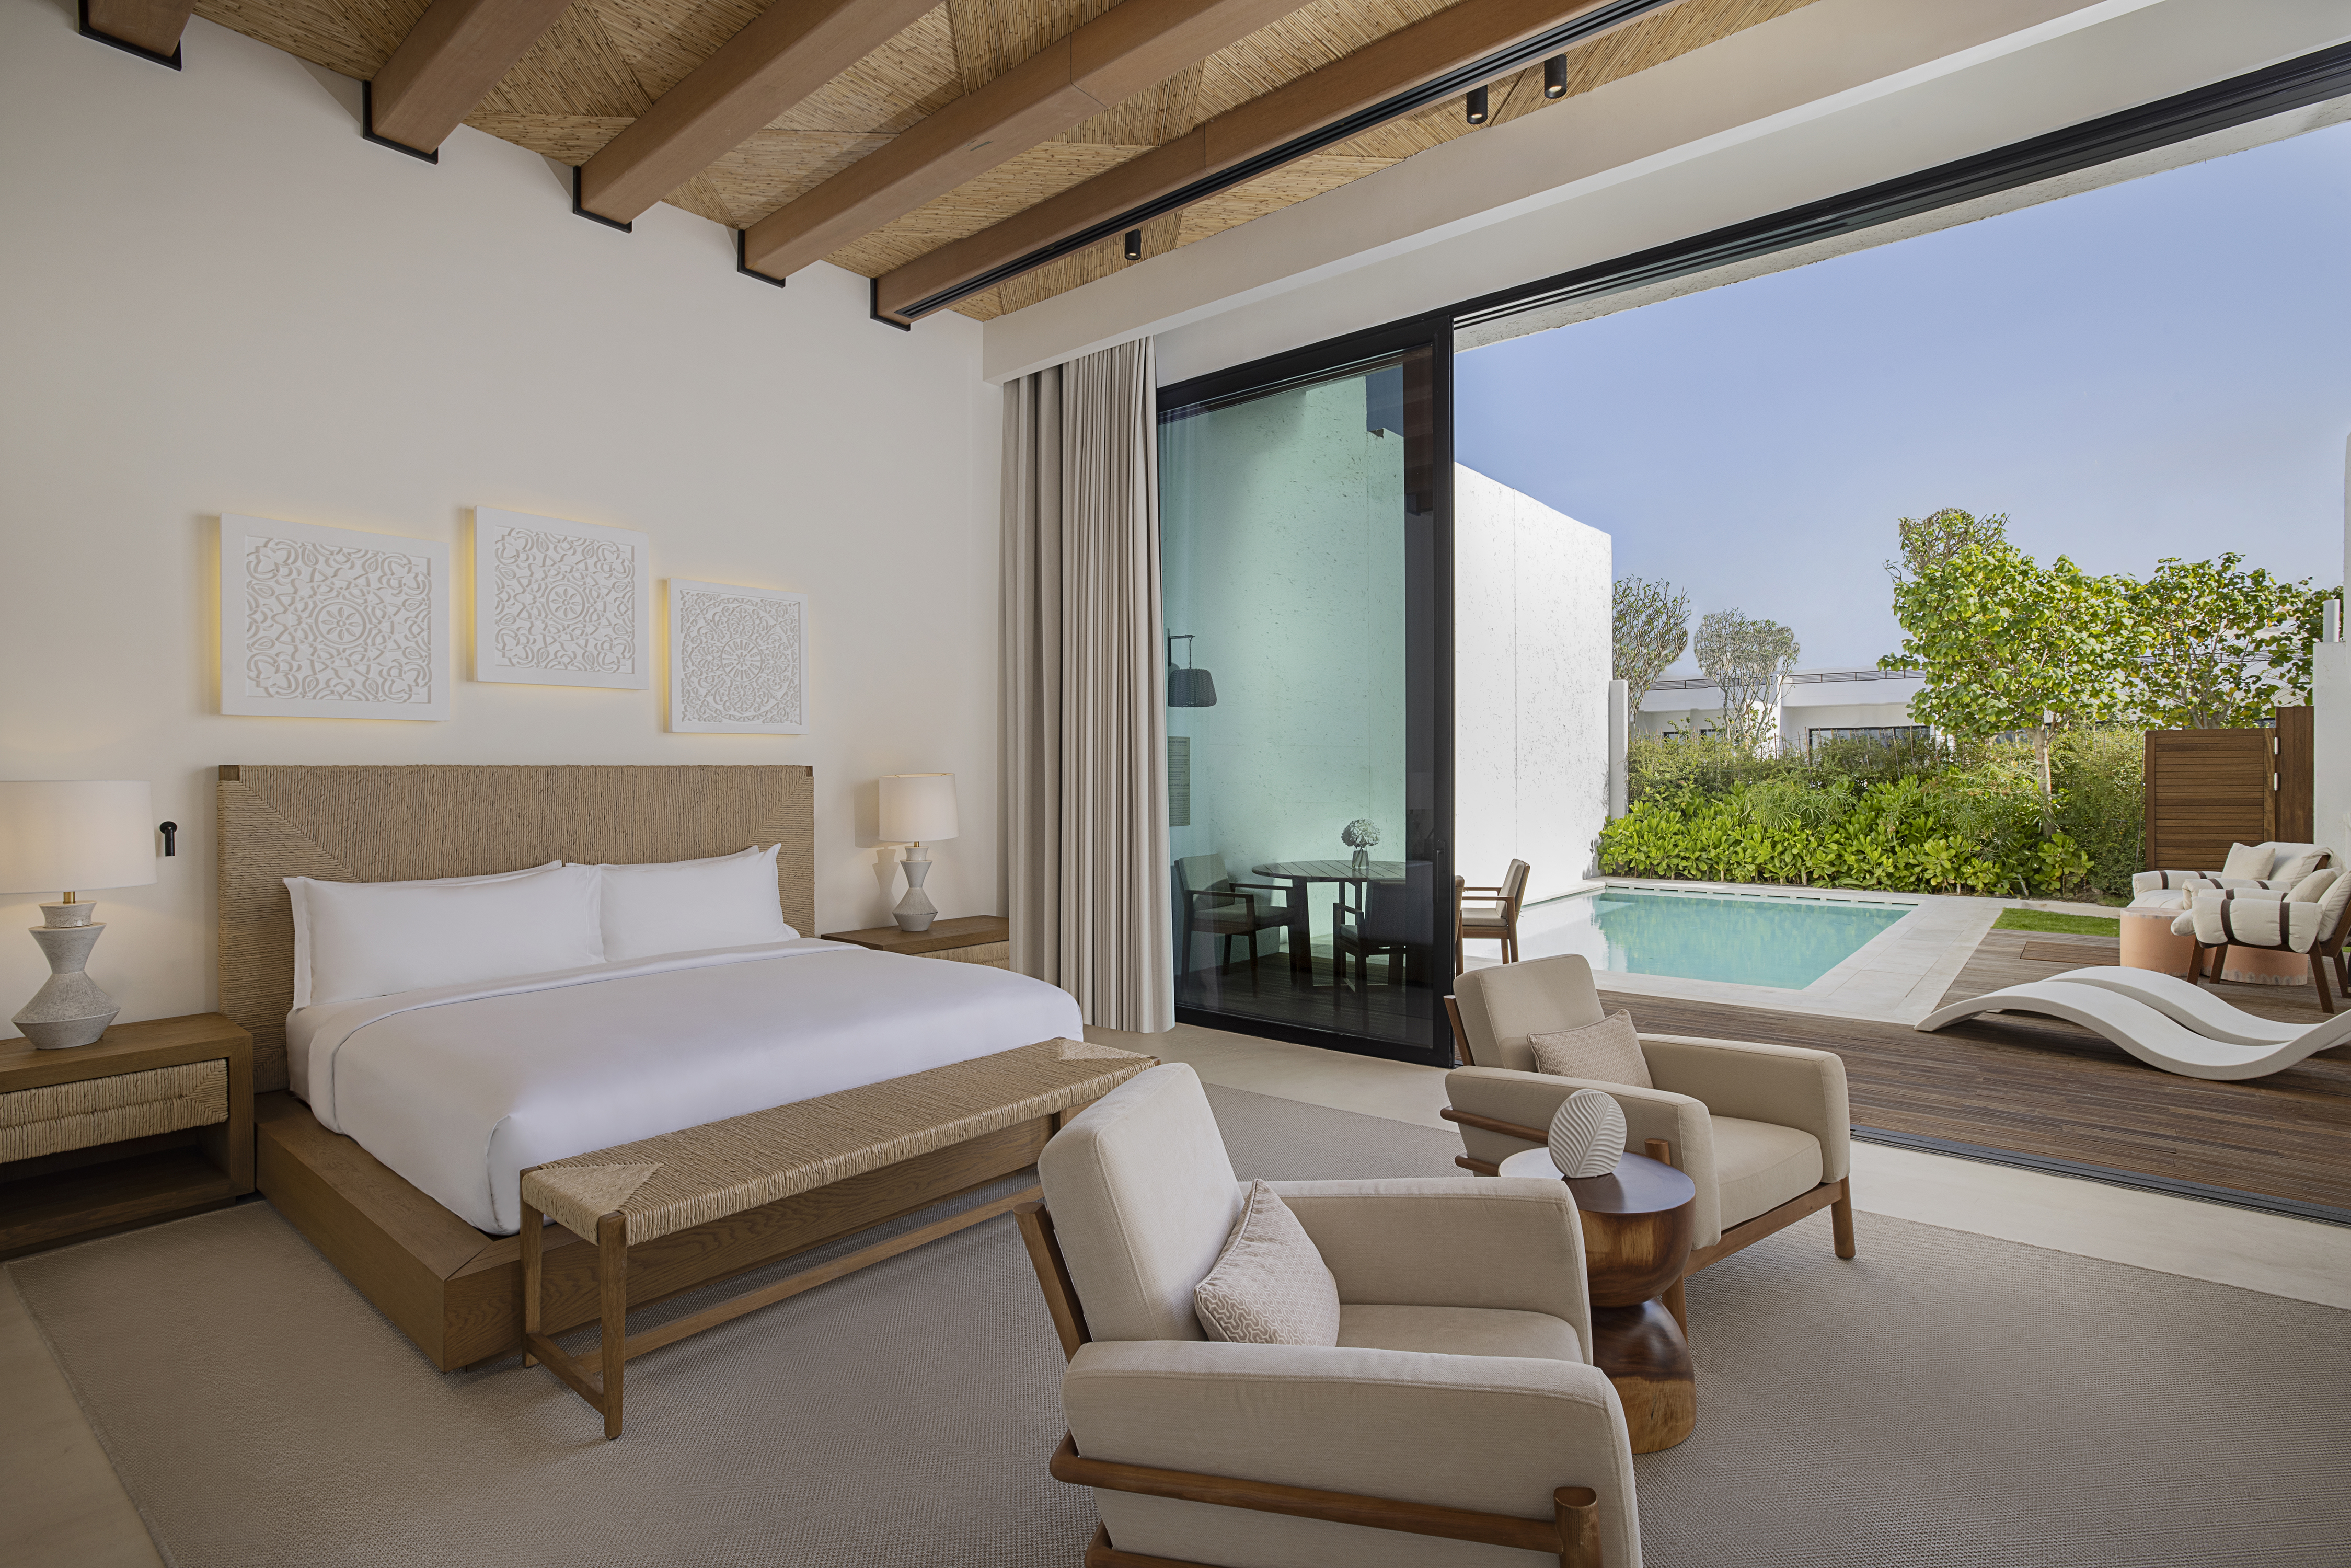 Suite Bedroom with View of Outdoor Pool Area